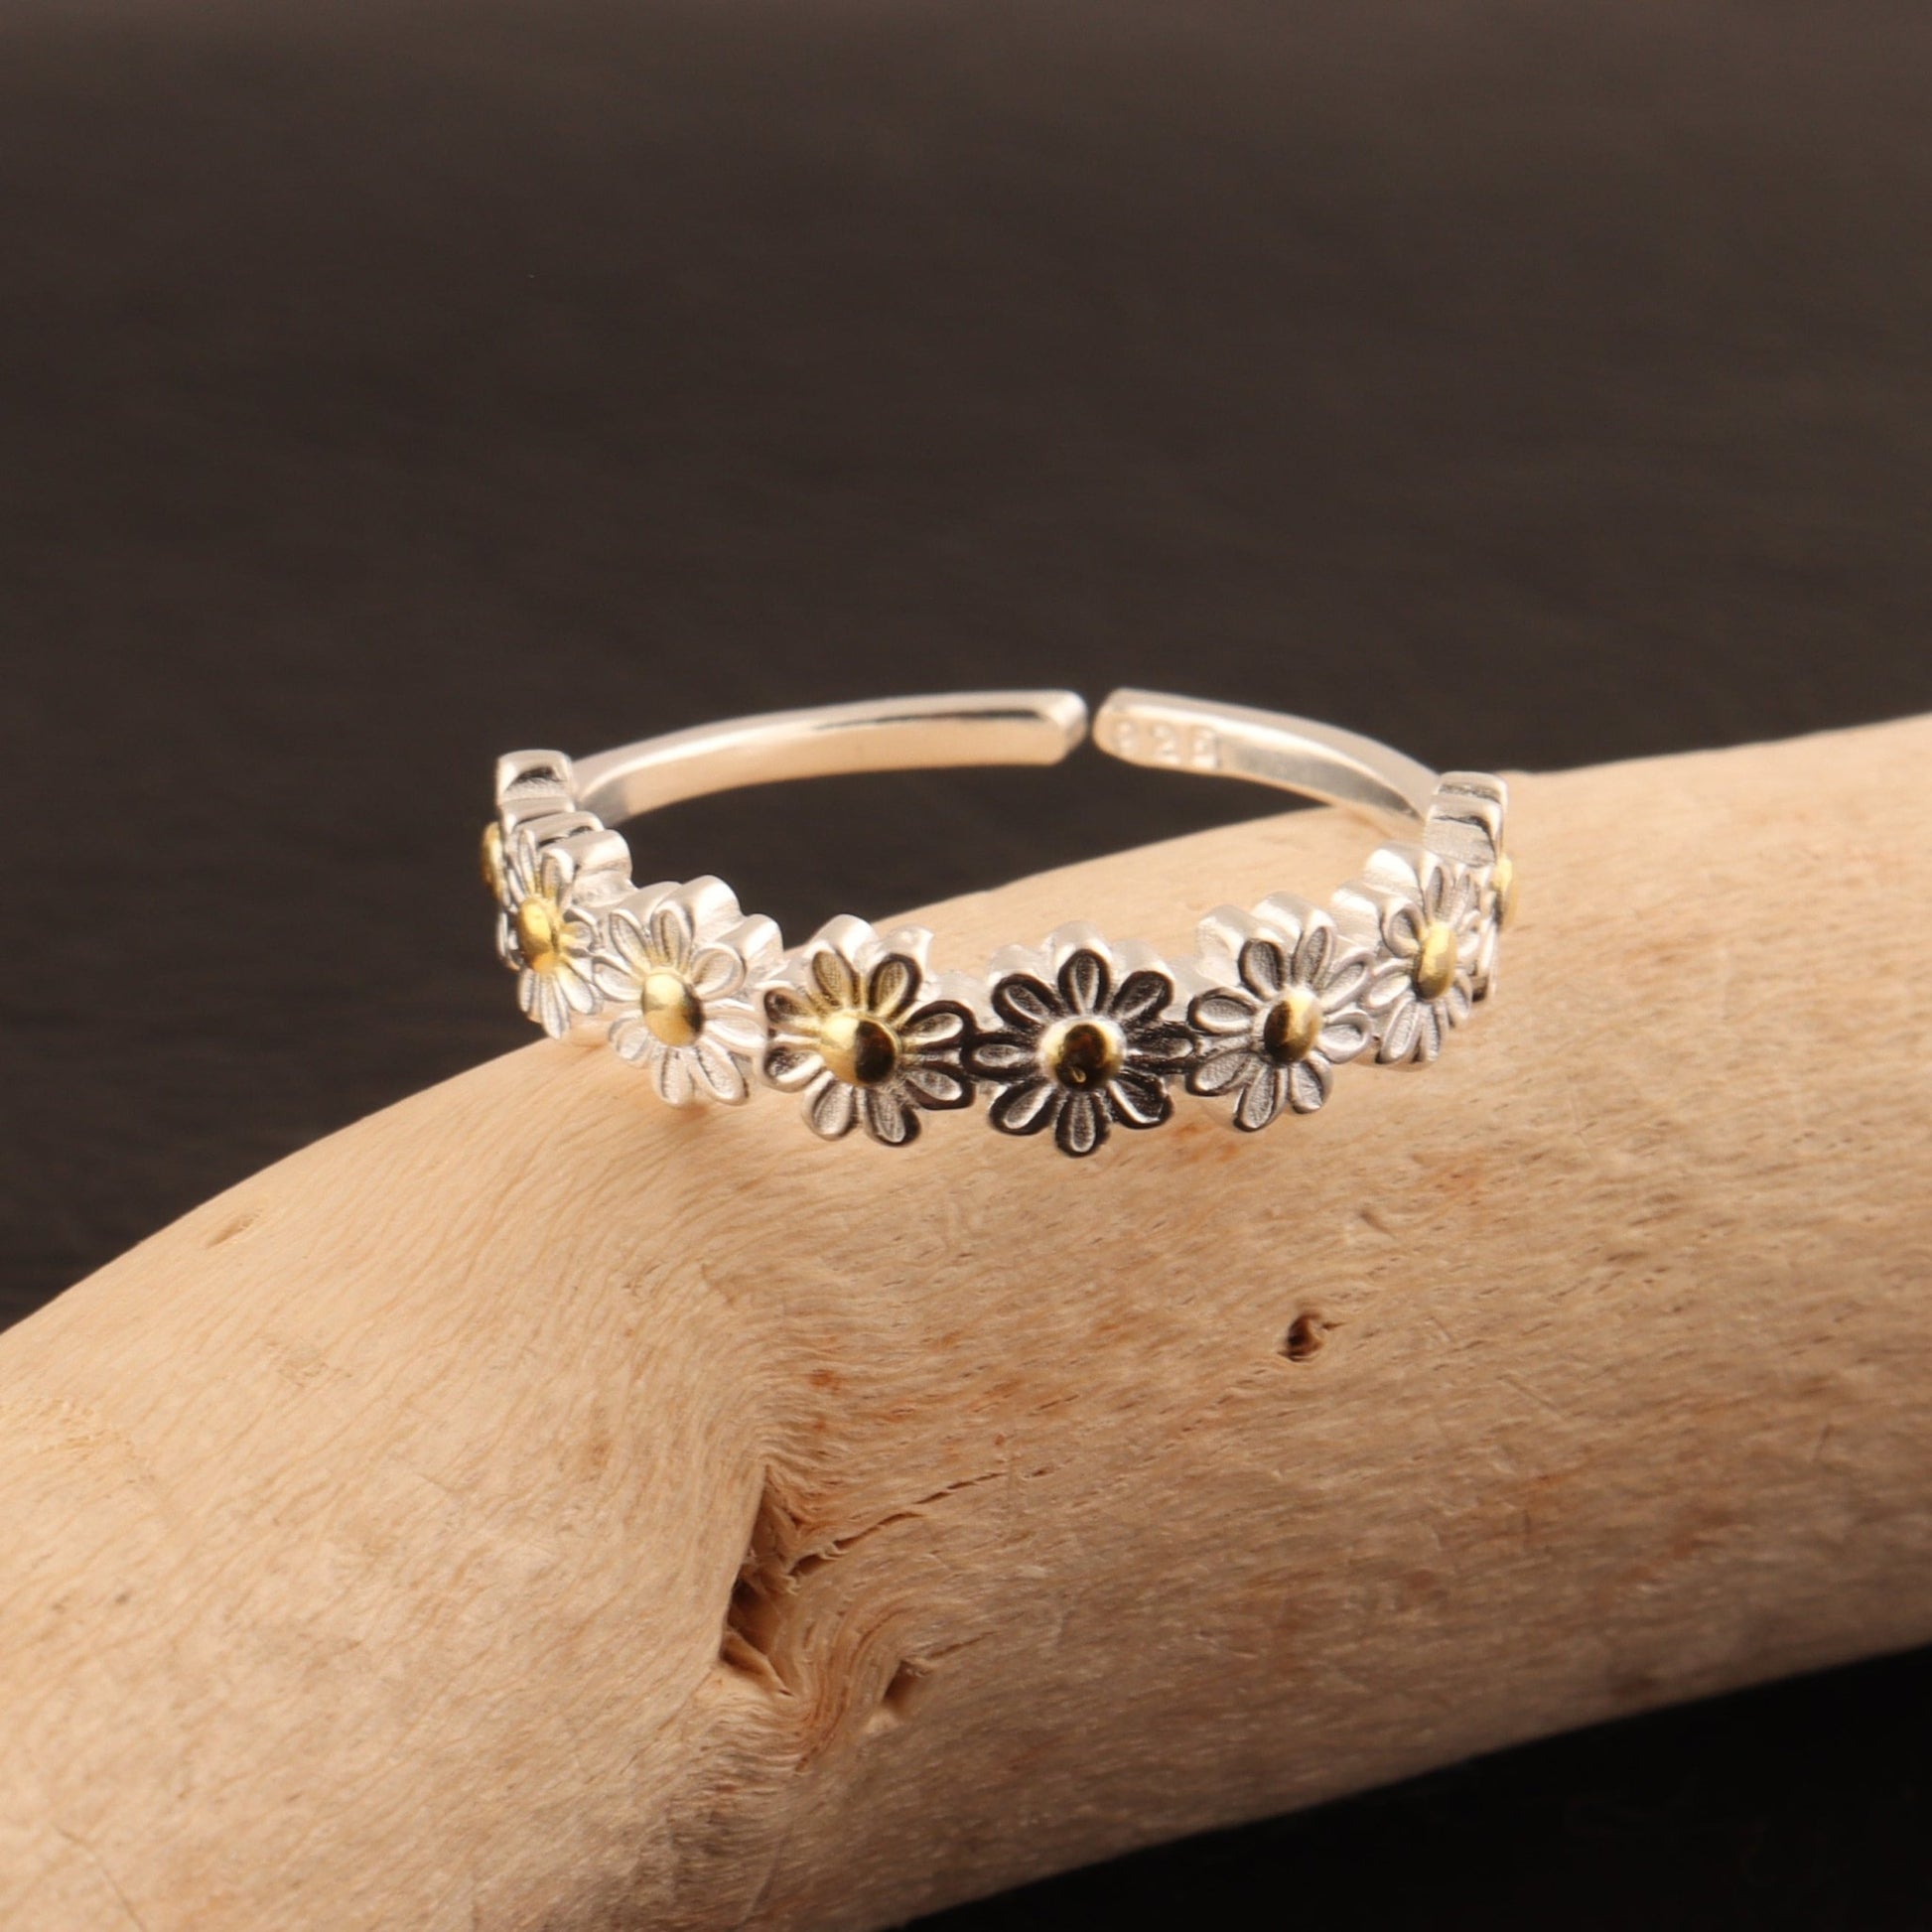 Bespoke Handmade Adjustable Sterling Silver Ring Adorned with Eight Daisies - SBJ